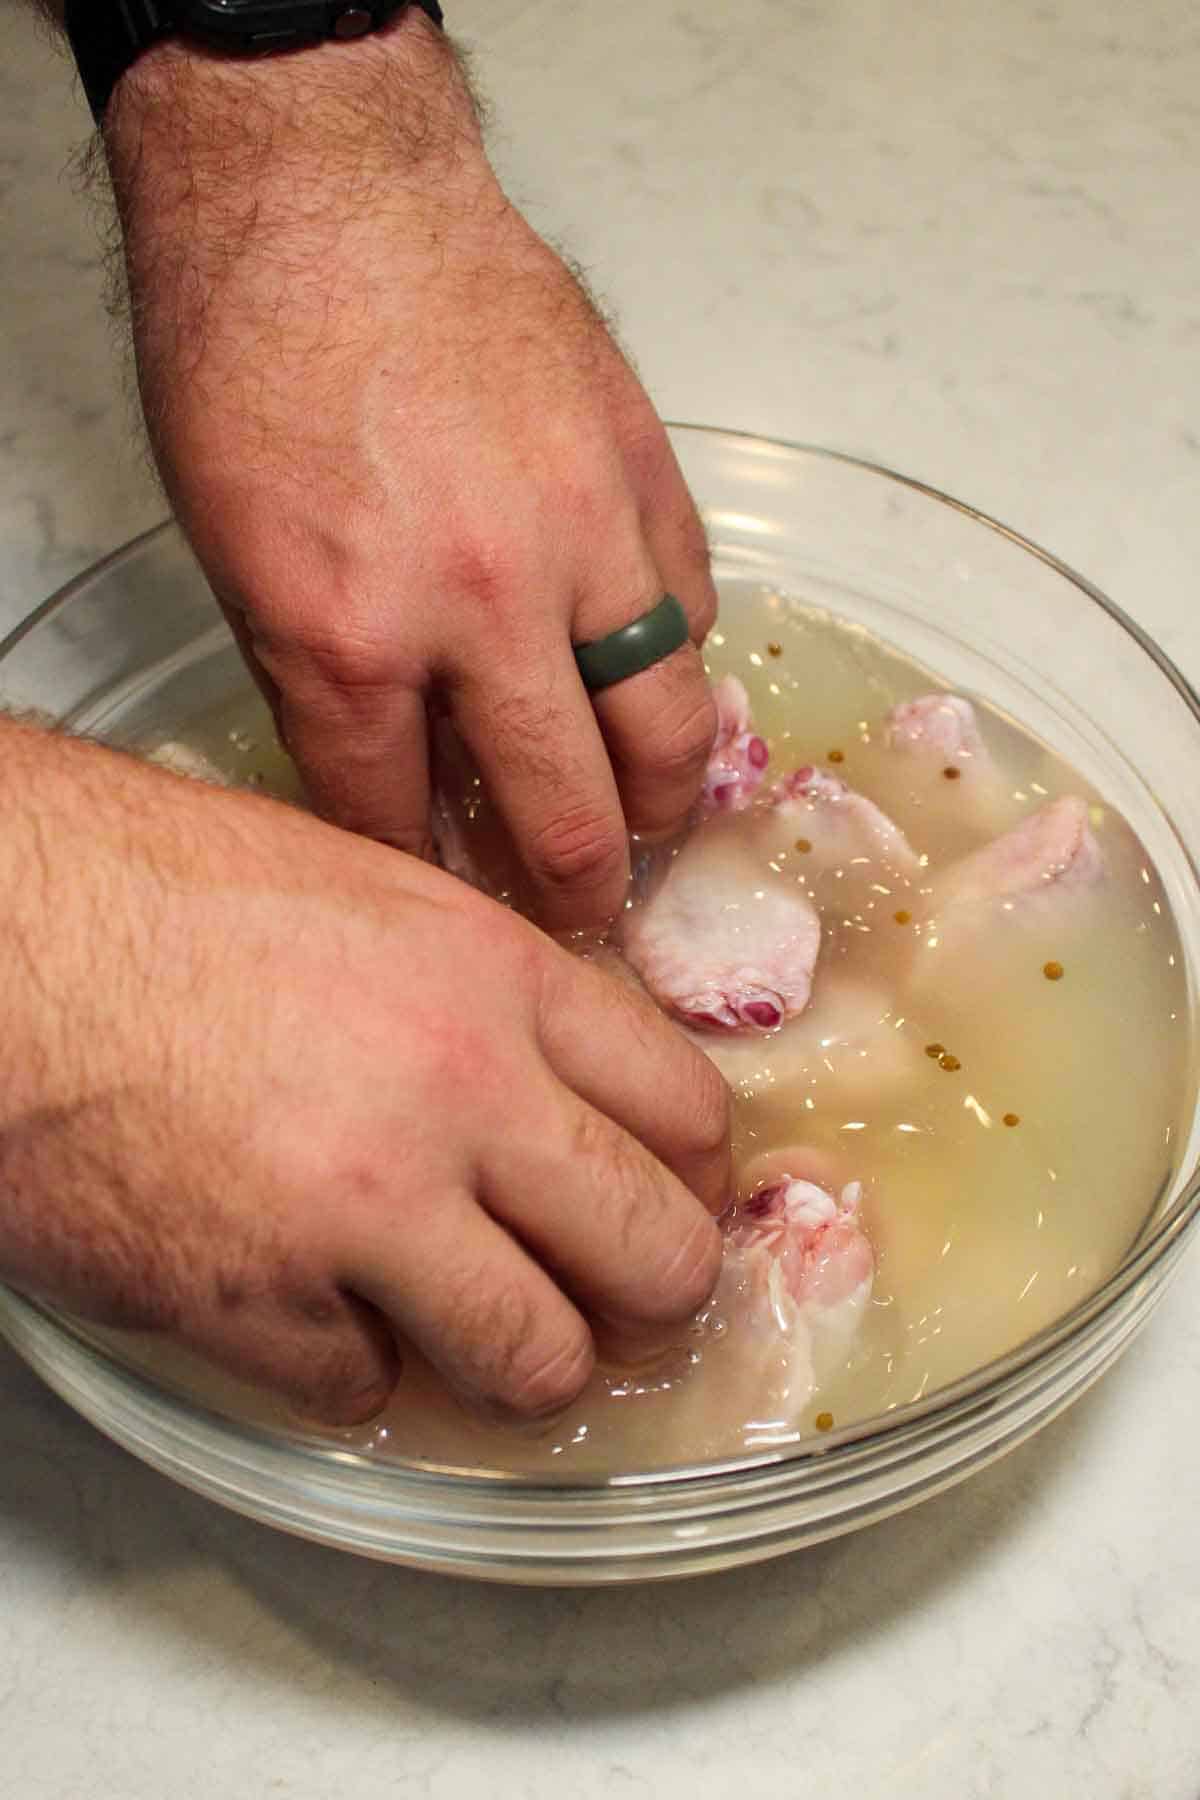 Adding the chicken wings to the pickle brine.